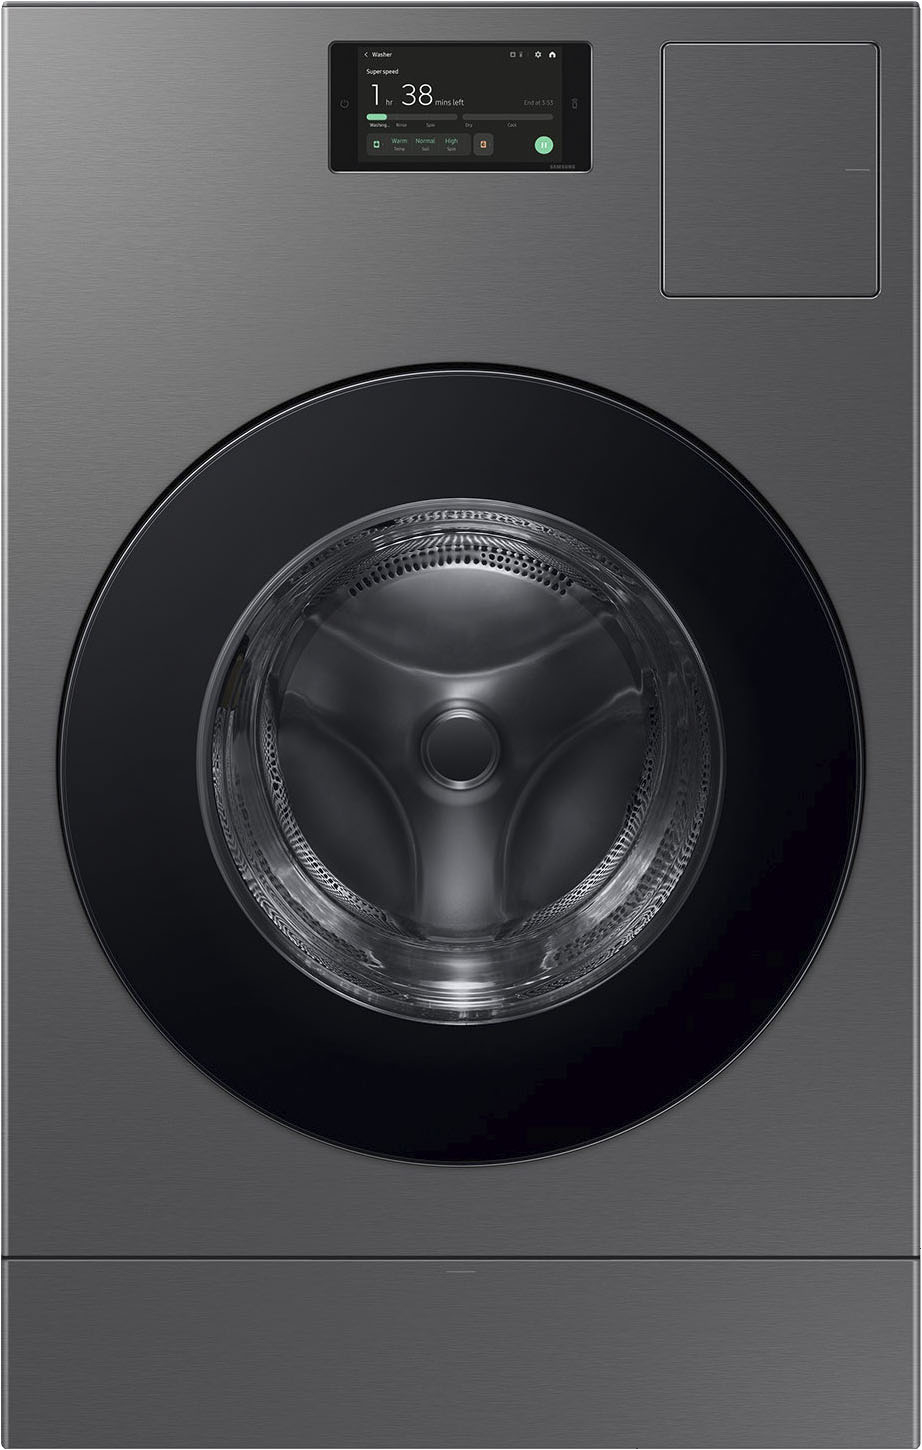 Samsung - Bespoke AI 5.3 Cu. Ft. All-in-One Washer & Dryer Combo with Super Speed Wash and Ventless Heat Pump Dryer - Dark Steel